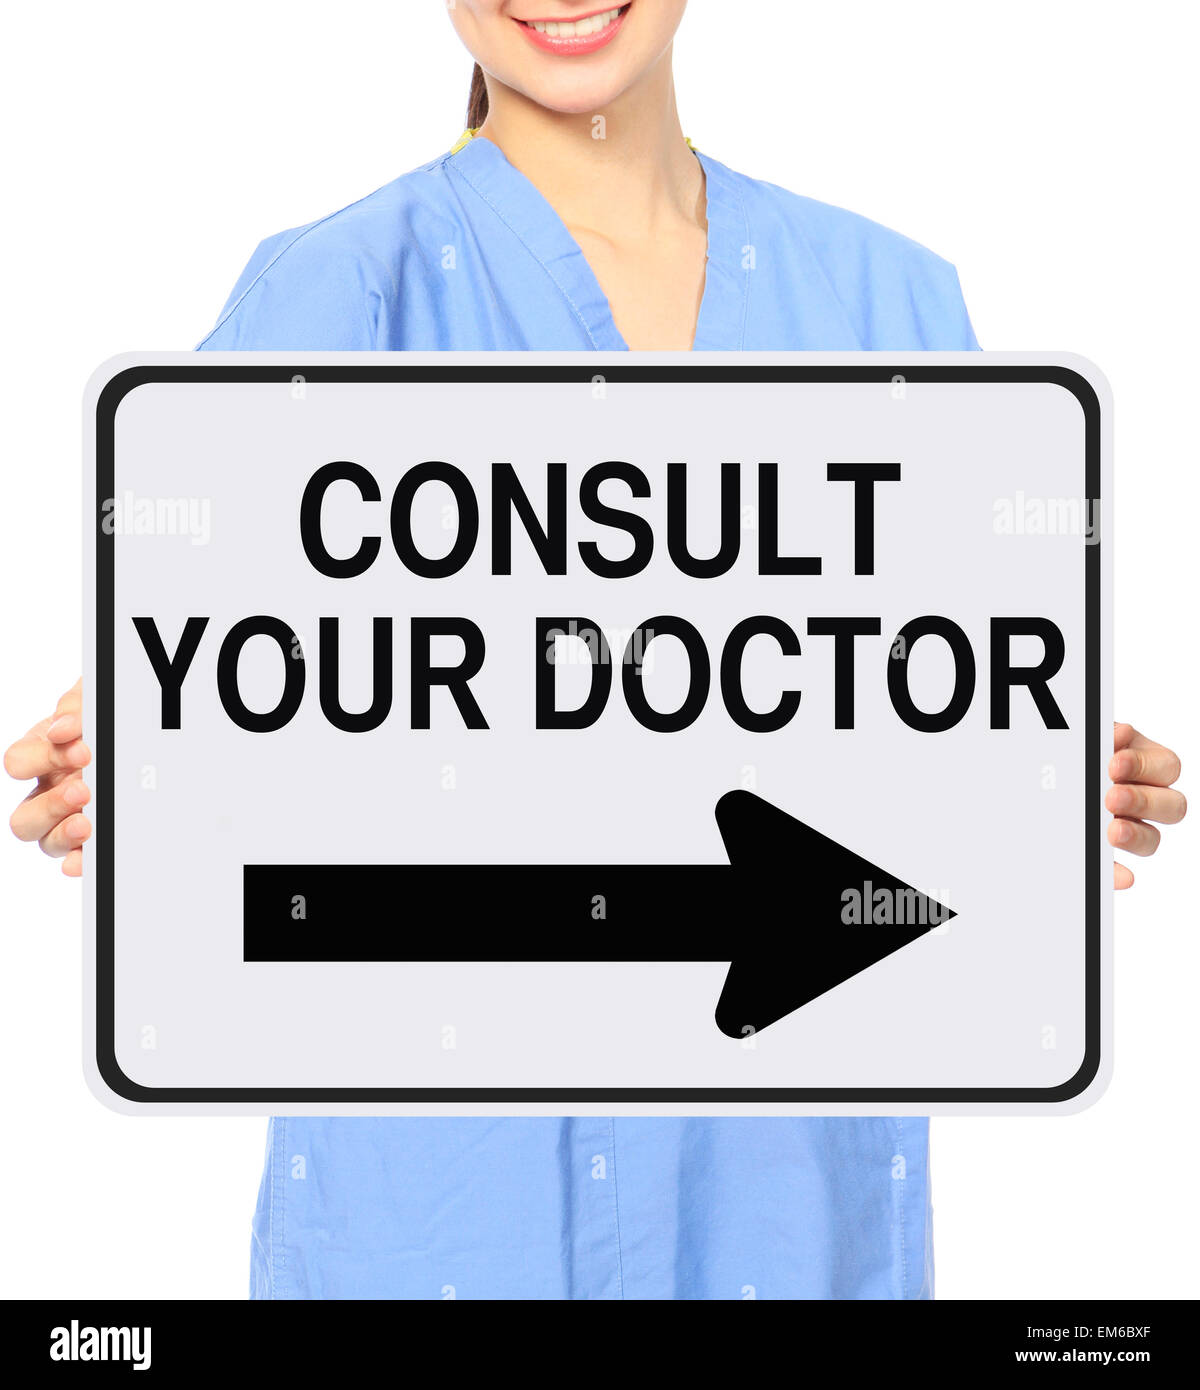 Consult Your Doctor Stock Photo